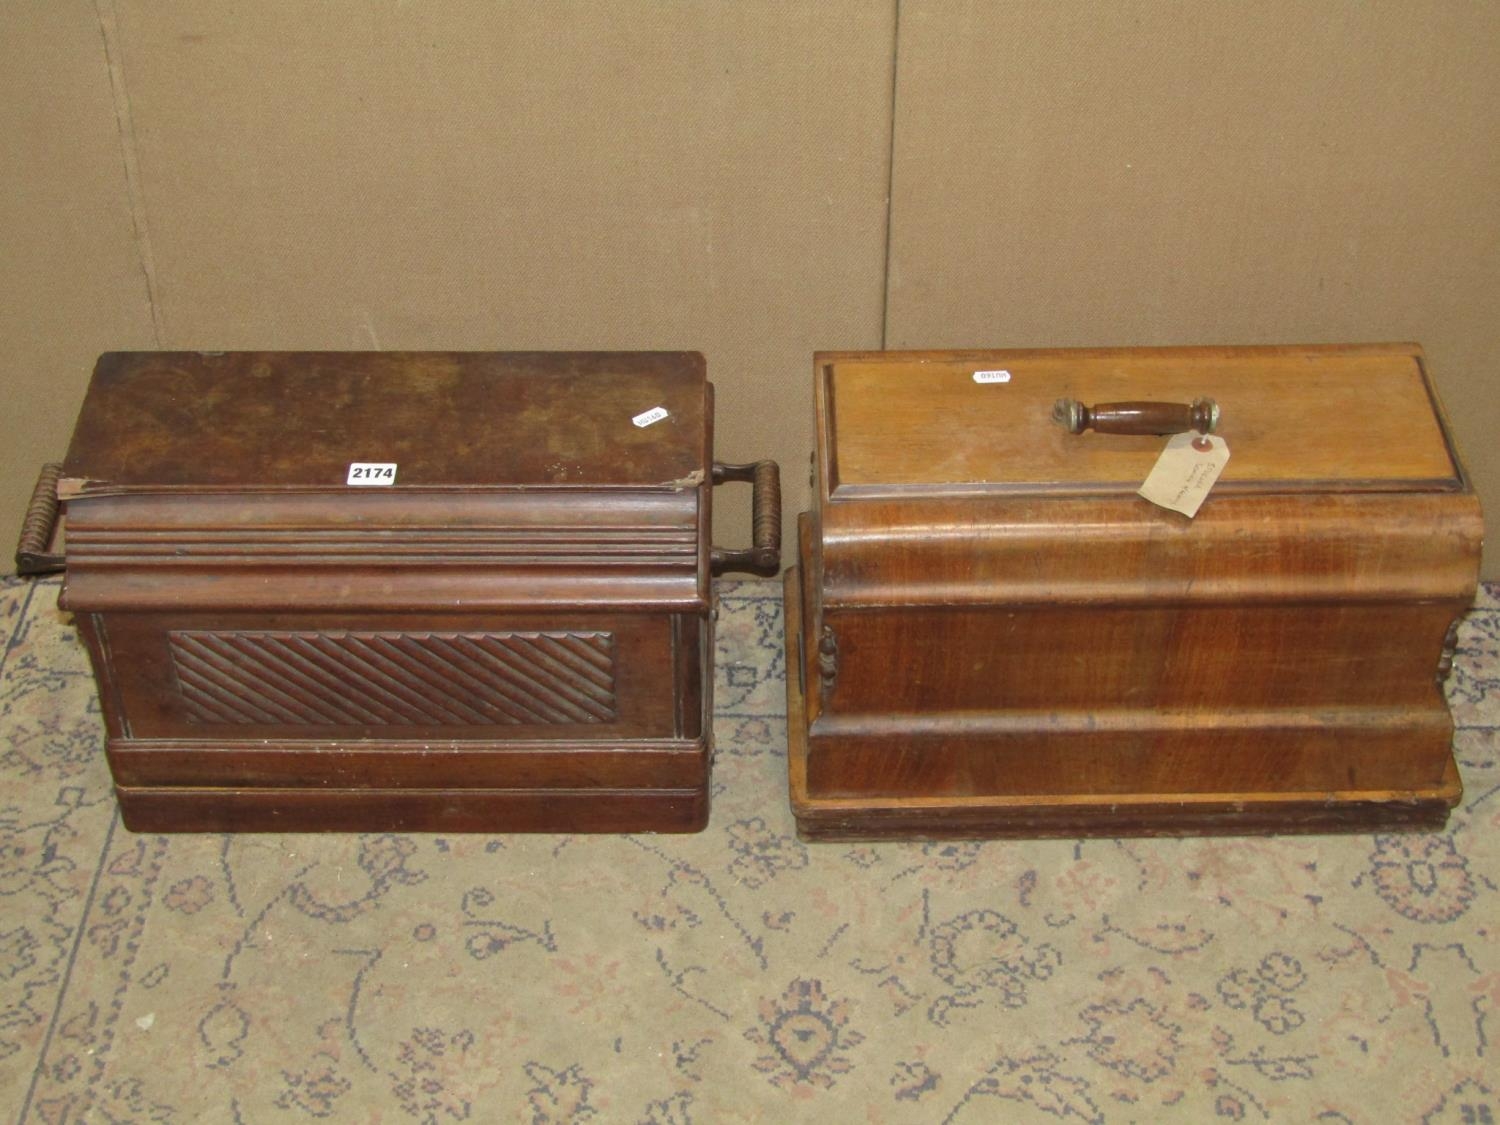 Two vintage portable cased sewing machines, Stoewer & Singer examples with decorative transfer